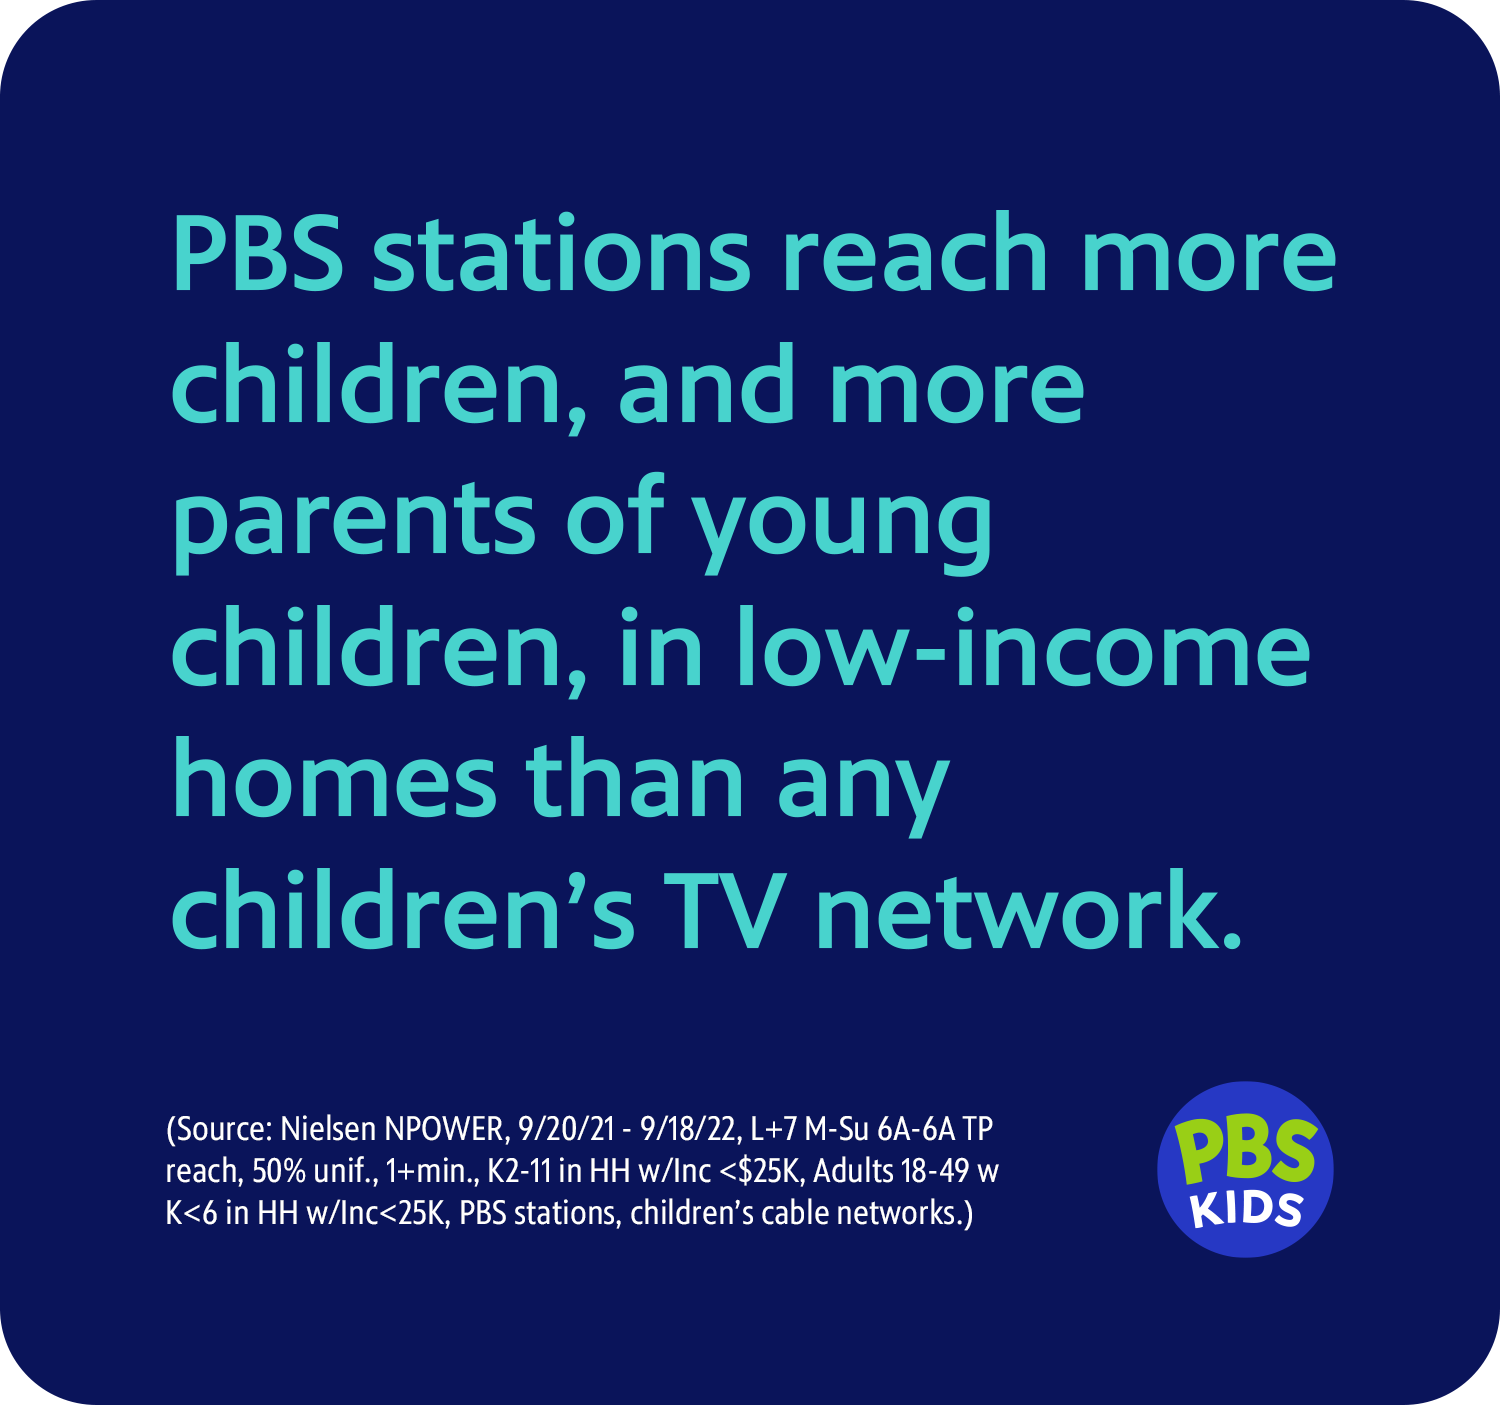 PBS stations reach more children than any other kid's TV network